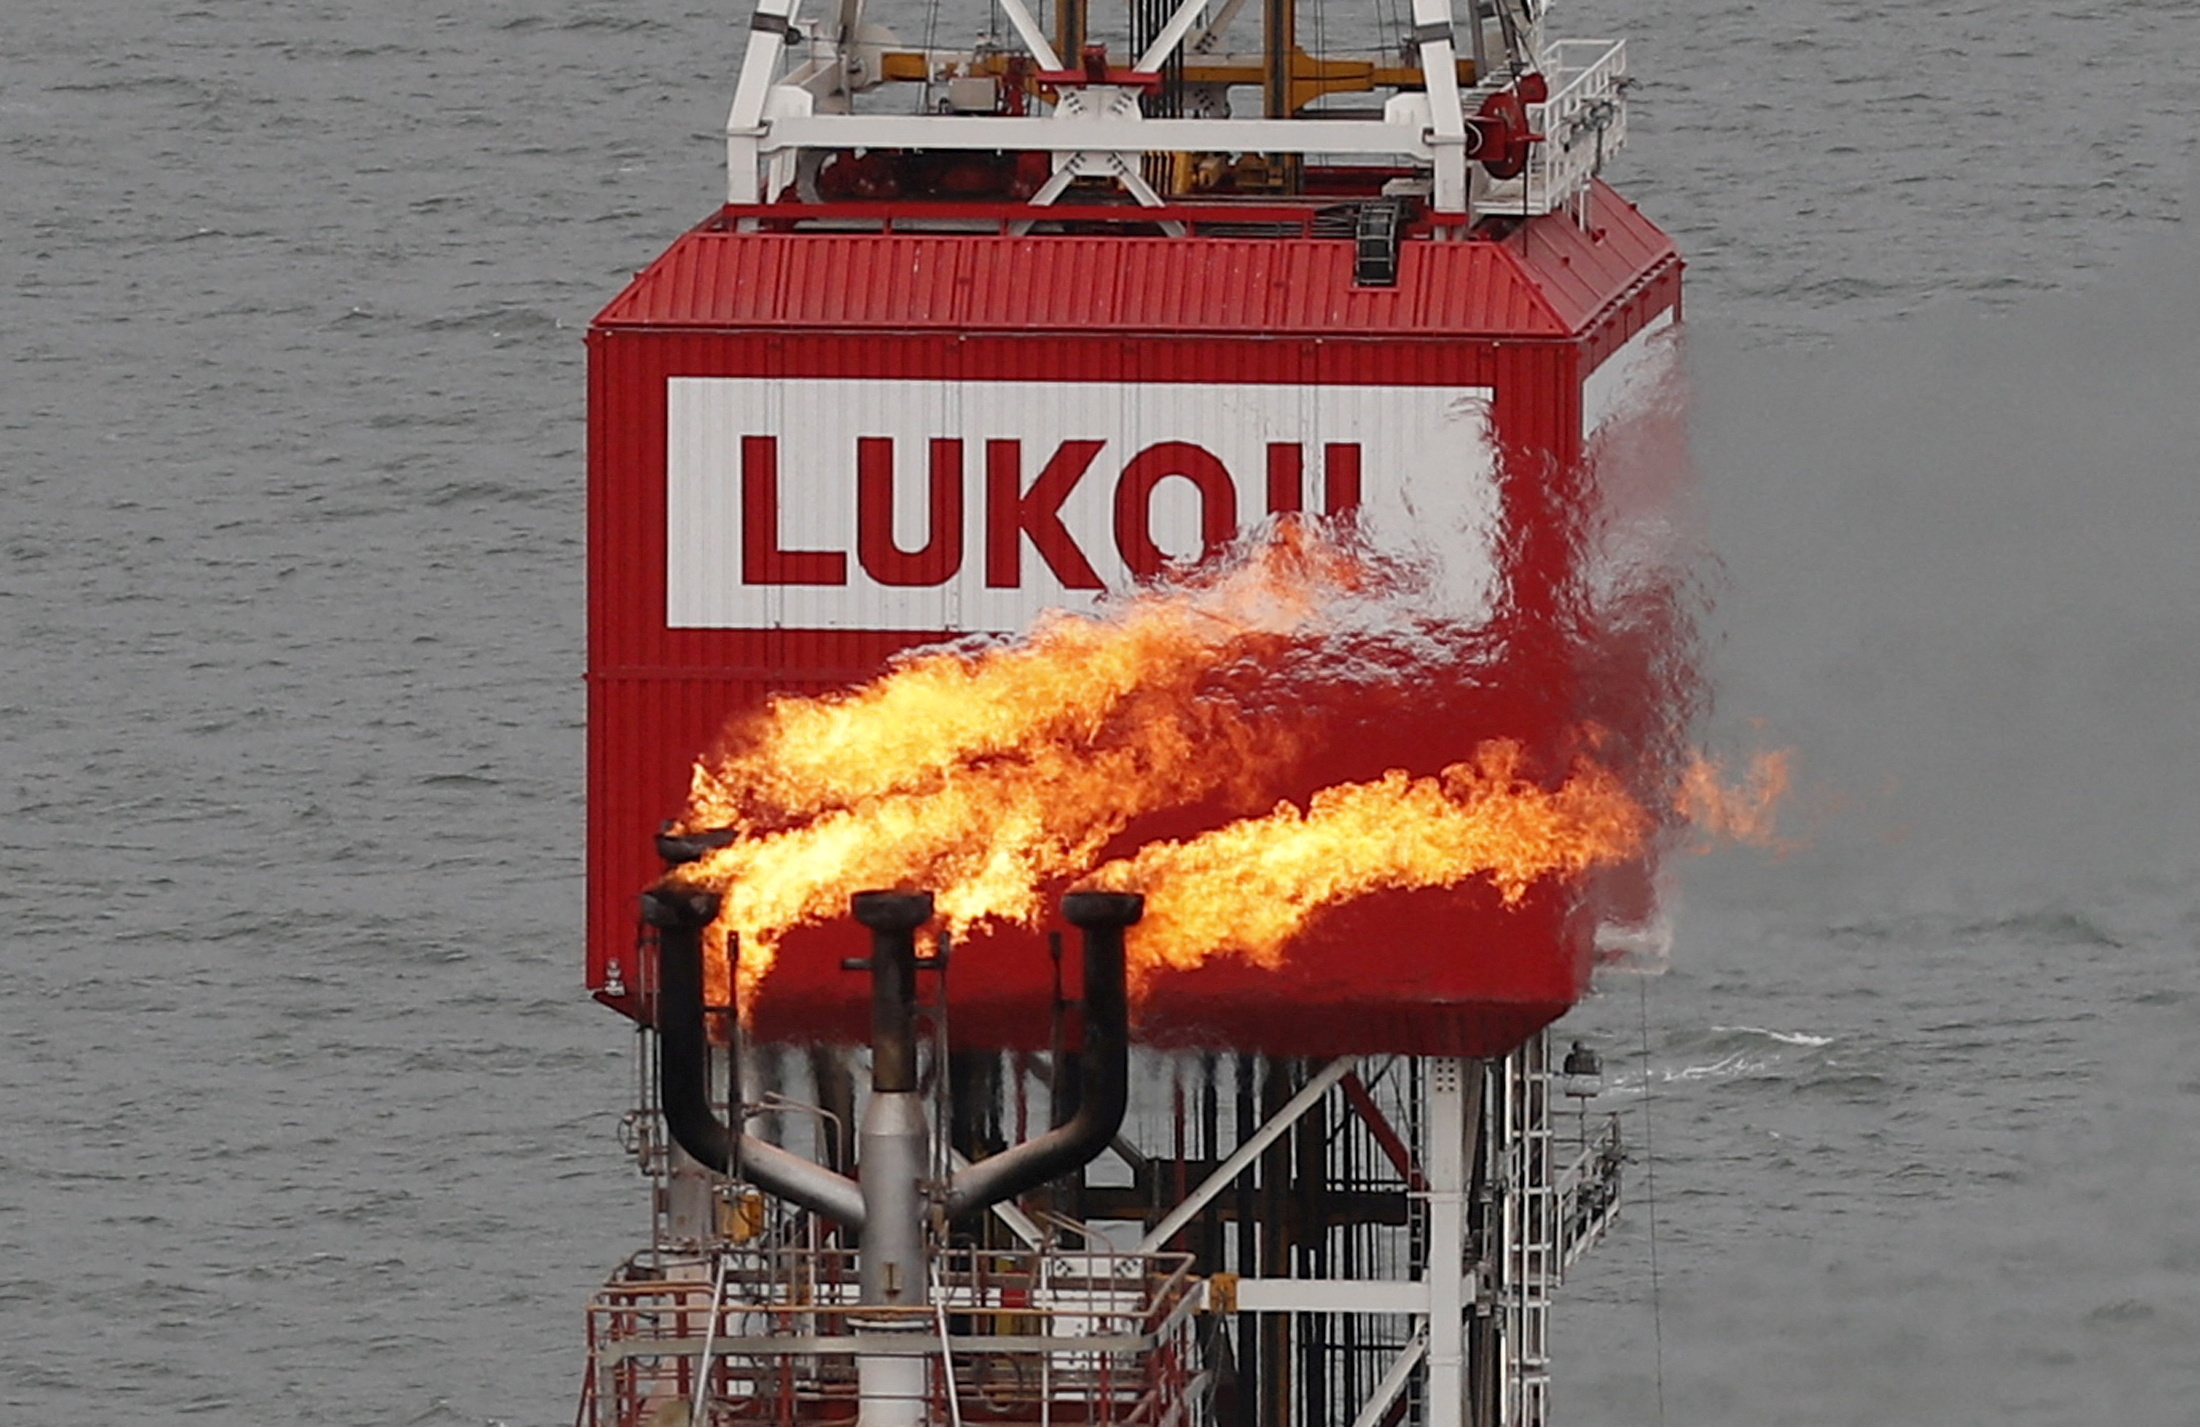 A gas torch is seen next to the Lukoil company sign at the Filanovskogo oil platform in the Caspian Sea